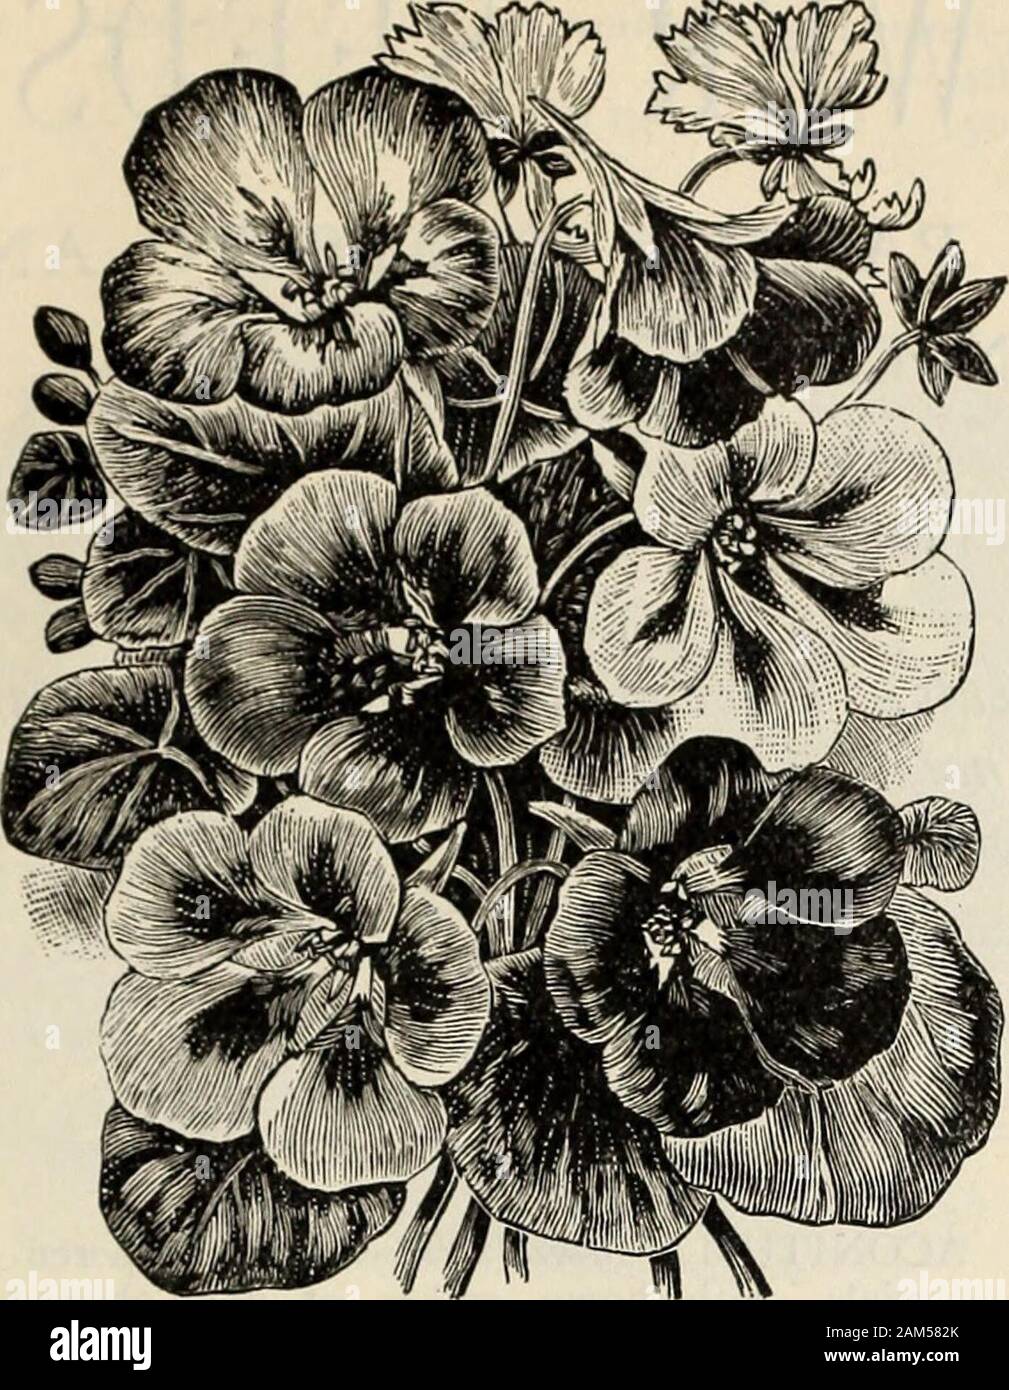 Farquhar's catalogue : spring 1904 . Evans Boston Giant Mignonette. R. & J. FARQUHAR & CO.8 SEED CATALOGUE. 41 NOVELTIES IN FLOWER SEEDS —Continued.. ^°- 5457* Farquhars Rainbow Mixture; TallNasturtium. The most showy and varied in colorof ail Running Nasturtiums; the mixture includesthirty of the choicest named varieties of tall Nasturtiumsand Tropseolums. In common with our Kent-grownstrain, this Rainbow Mixture is distinguished by therichness of co.or and size of the flowers, which exhibitevery shade of rose, salmon, bright red, bronze, ma-roon, pale yellow, etc., self-colored, spotted, and Stock Photo